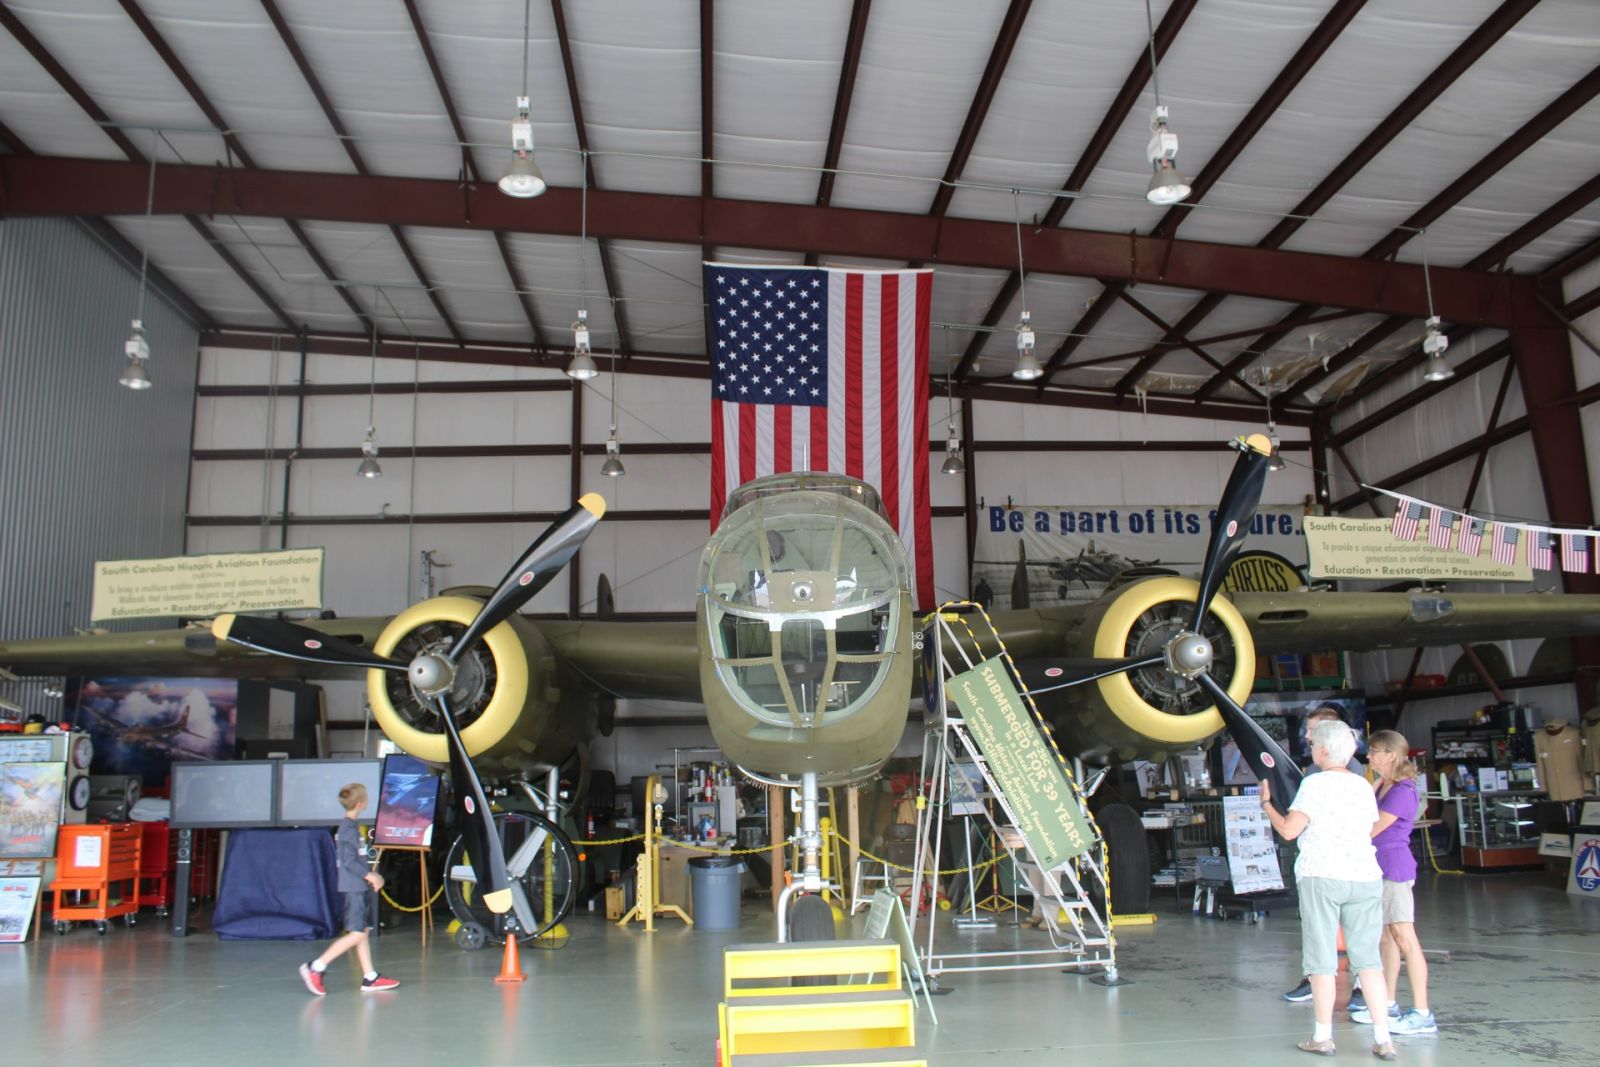 A B-25C Medium Bomber, fished out of Lake Greenwood in 1983 after crashing on a 1944 practice run, is being restored at the Jim Hamilton-L.B. Owens Airport in Columbia. (Photo/Christina Lee Knauss)